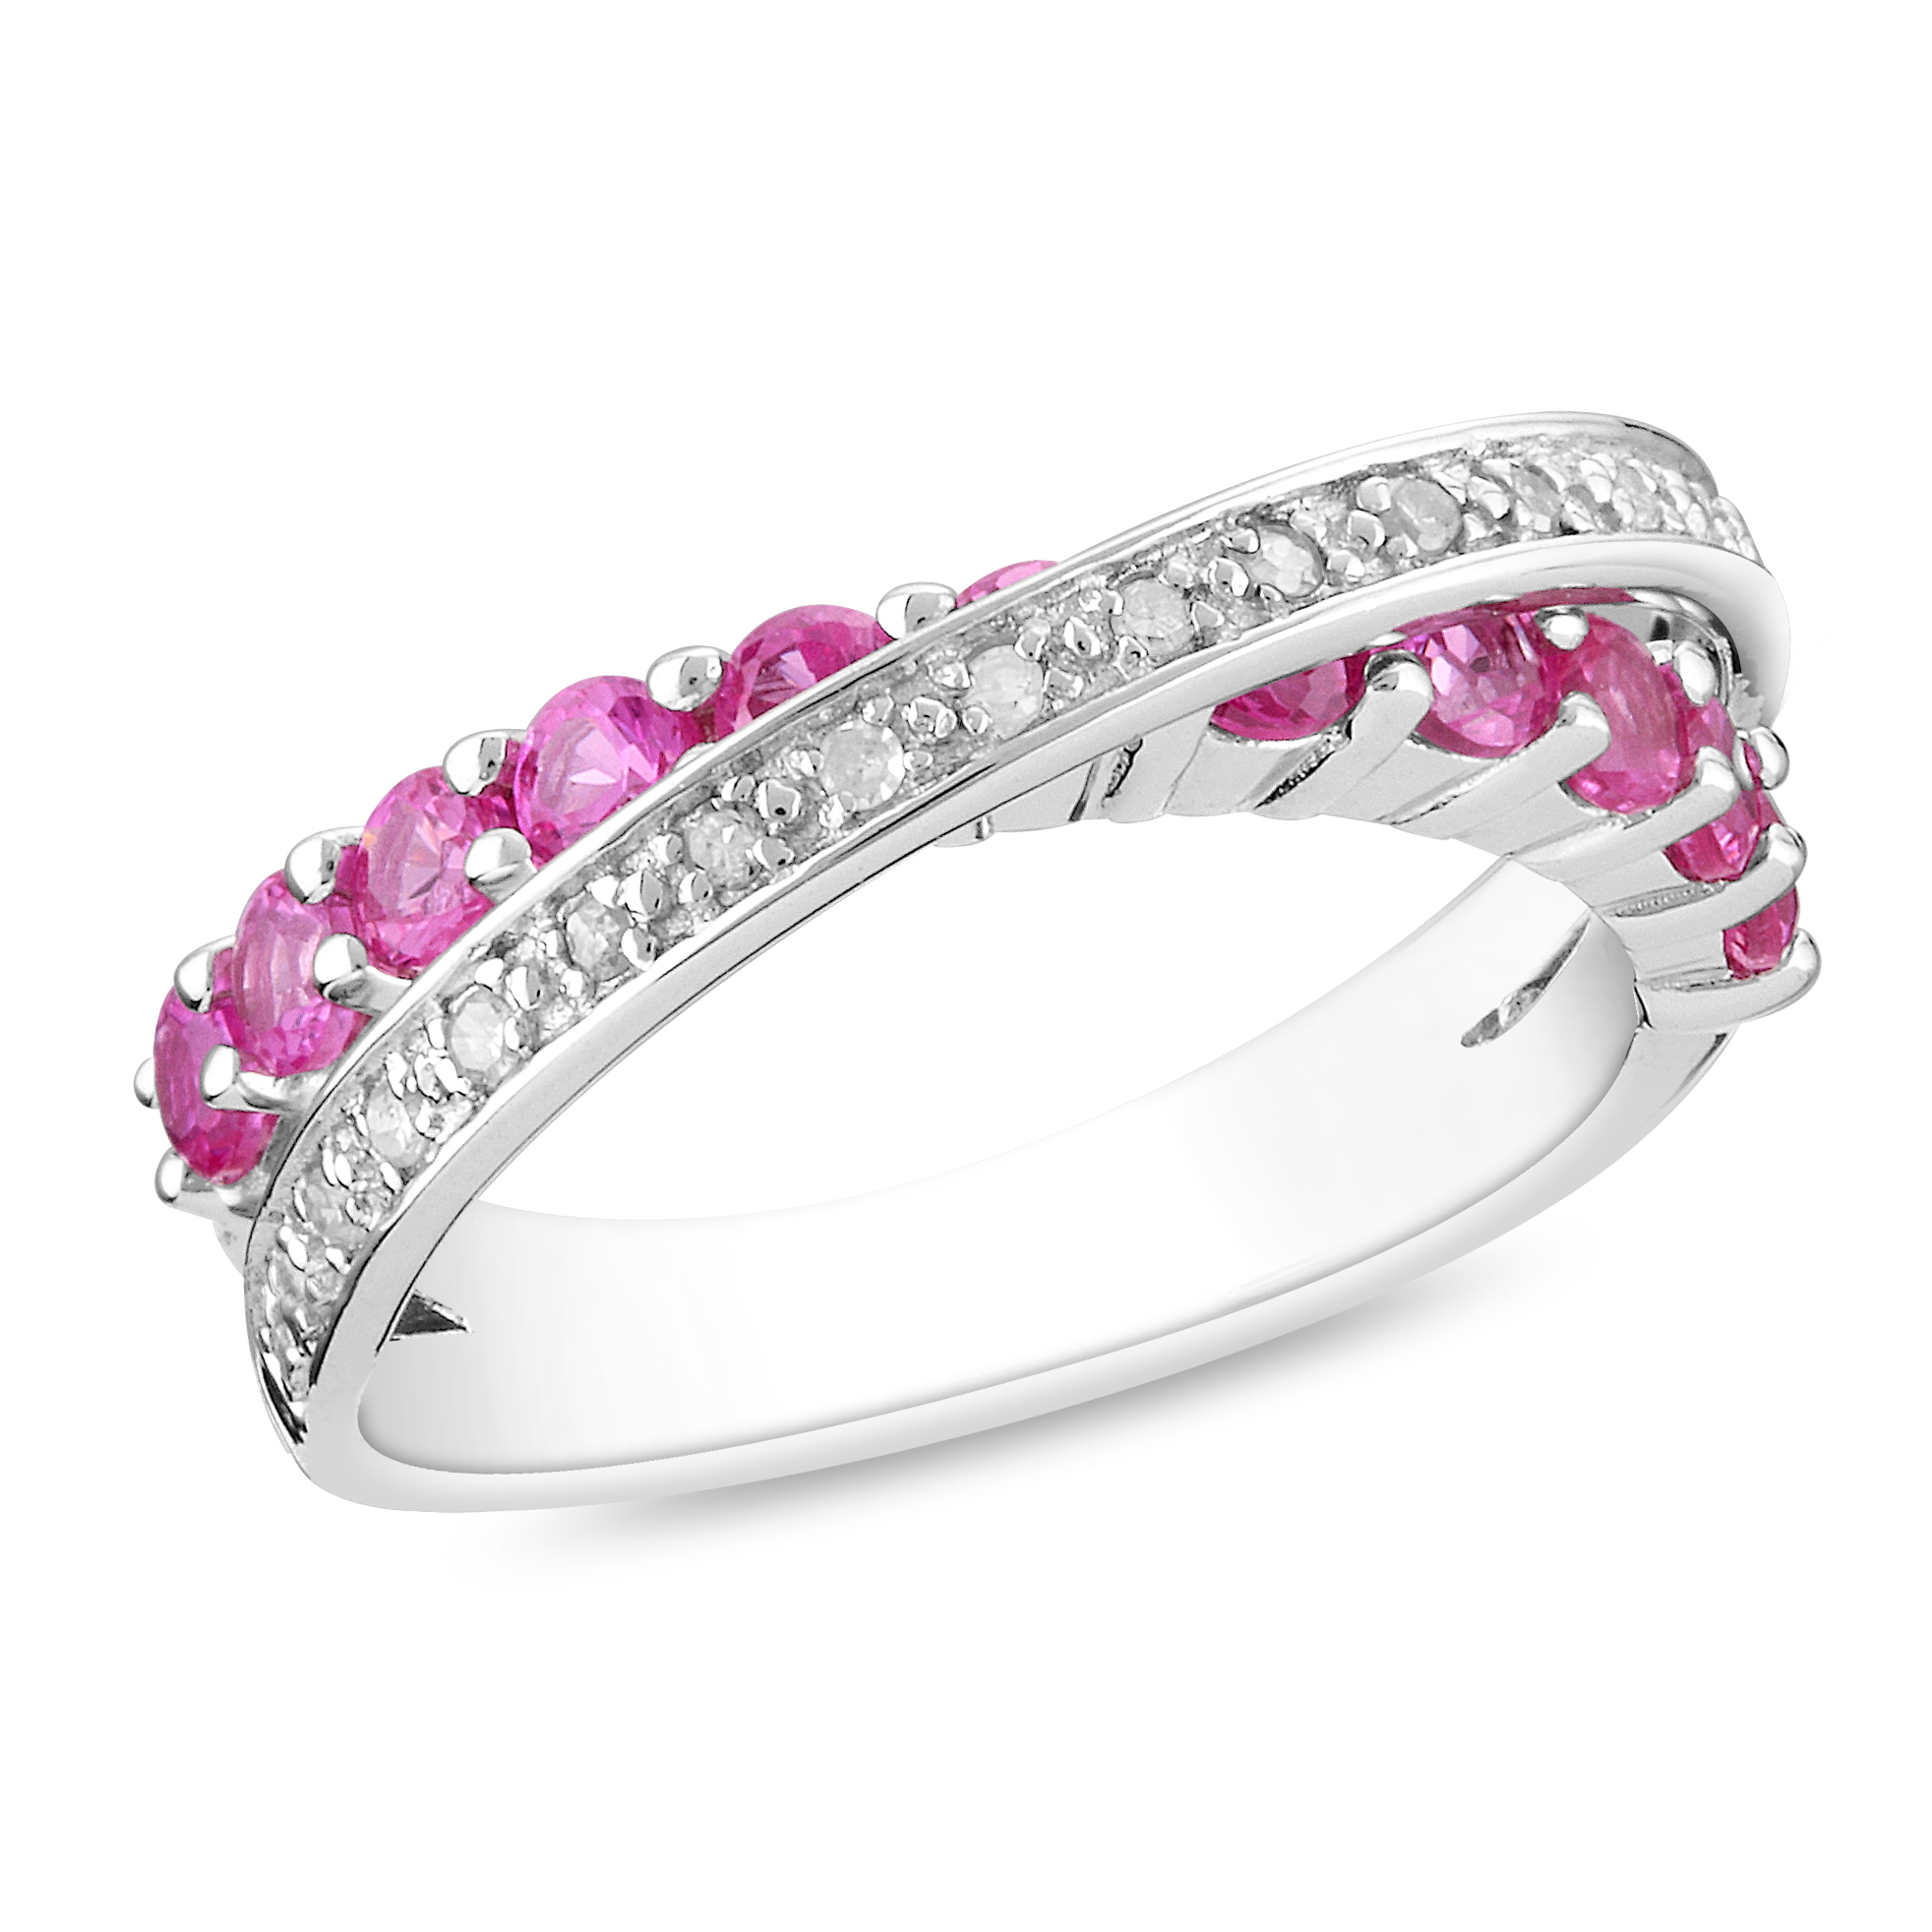 1/10 Carat T.W. Diamond and 1 Carat T.G.W. Created Pink Sapphire Fashion Ring in Sterling Silver GH I3